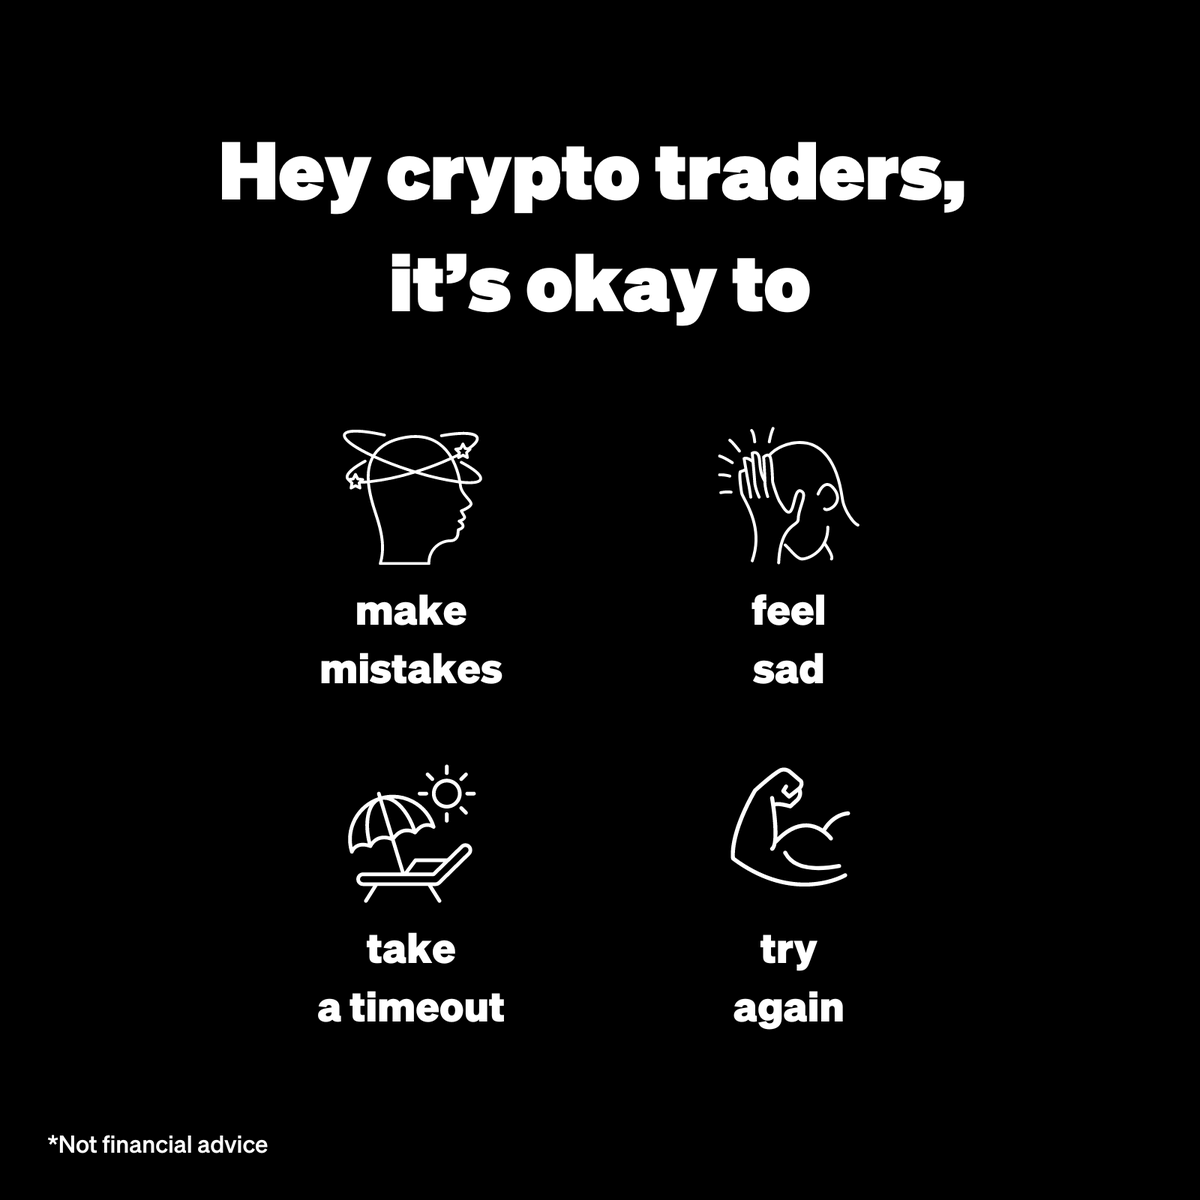 It's a long journey but don't forget to be kind to yourself and trade responsibly 💪